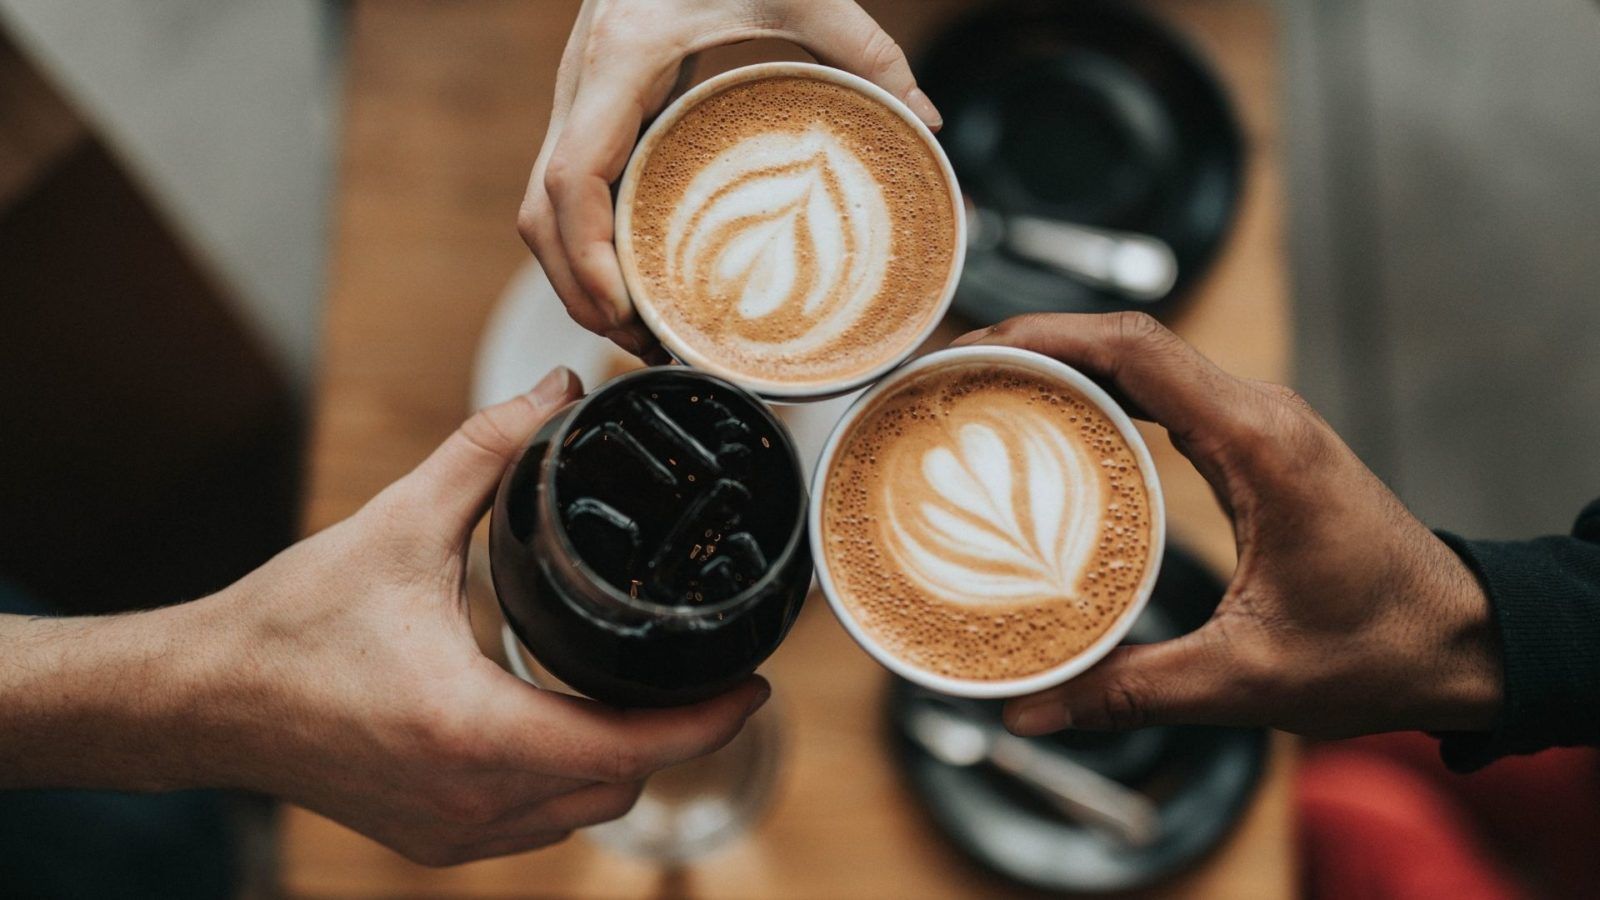 This is the perfect cup of coffee for you, as per your zodiac sign